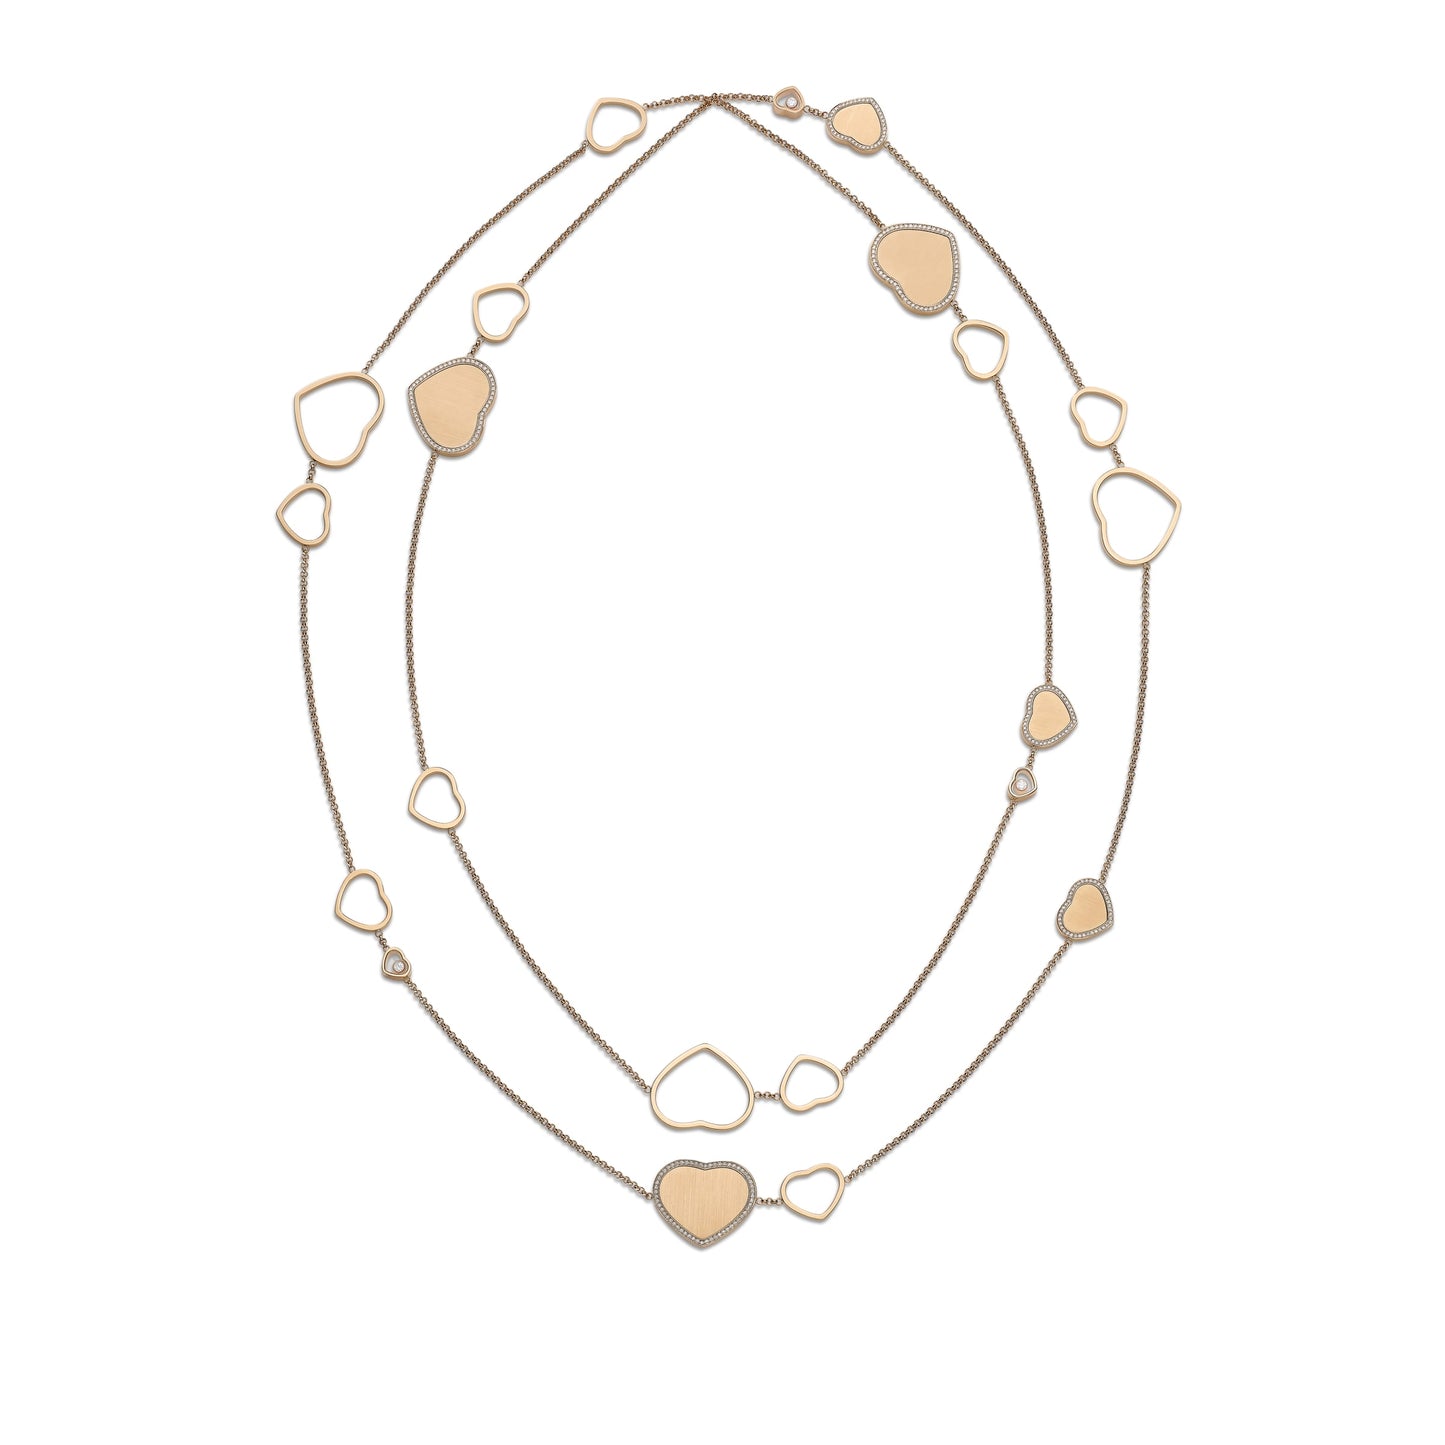 HAPPY HEARTS GOLDEN HEARTS SAUTOIR NECKLACE, ETHICAL ROSE GOLD, DIAMONDS 81A007-5921